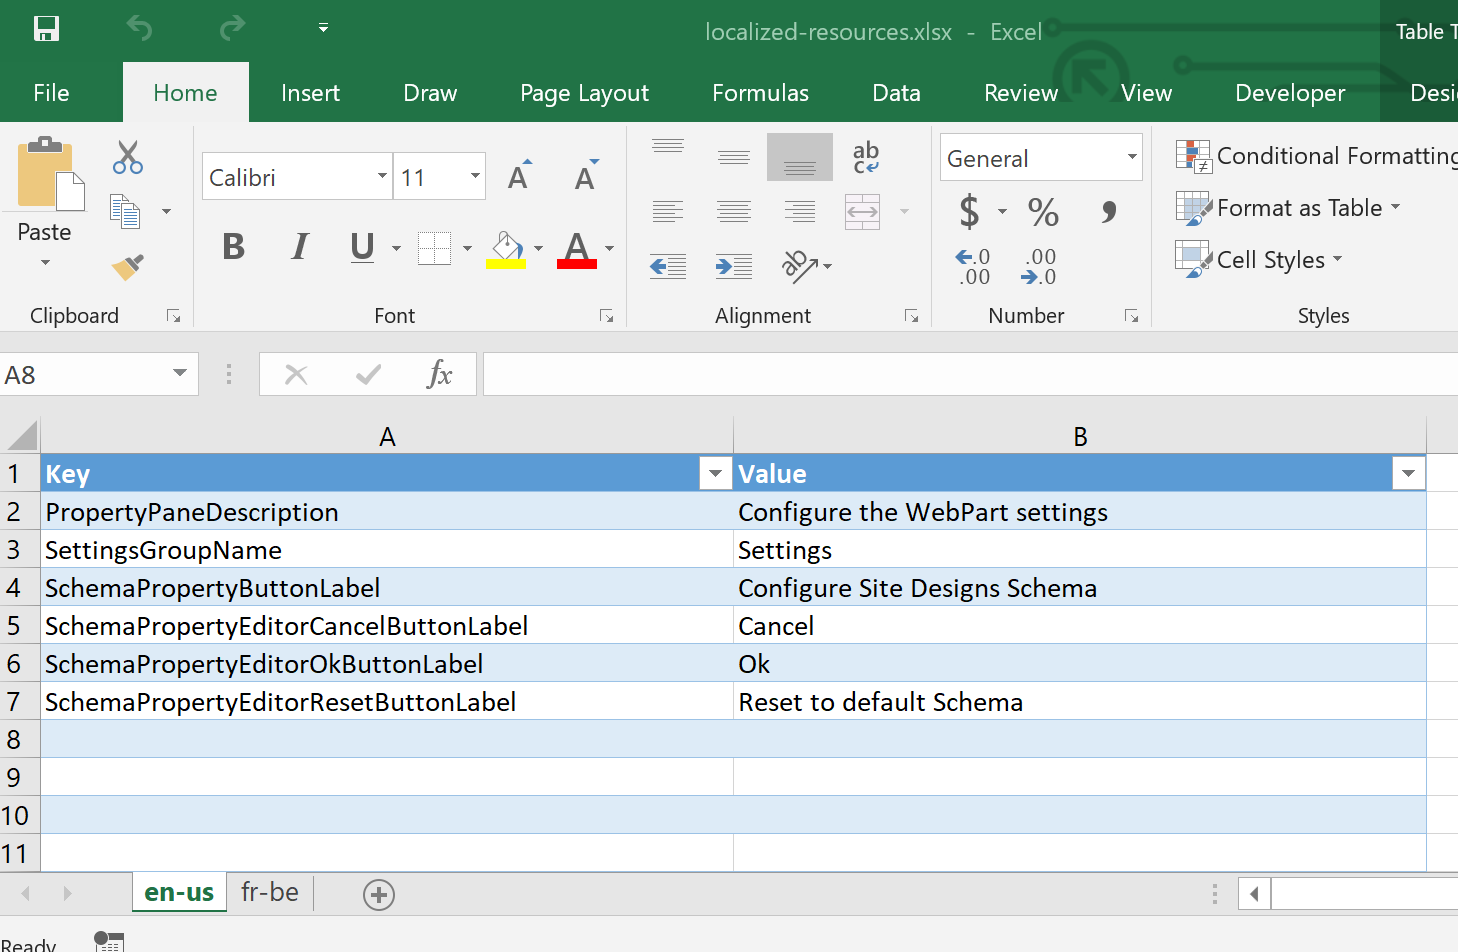 Excel and PowerShell to maintain your SPFx localized resources